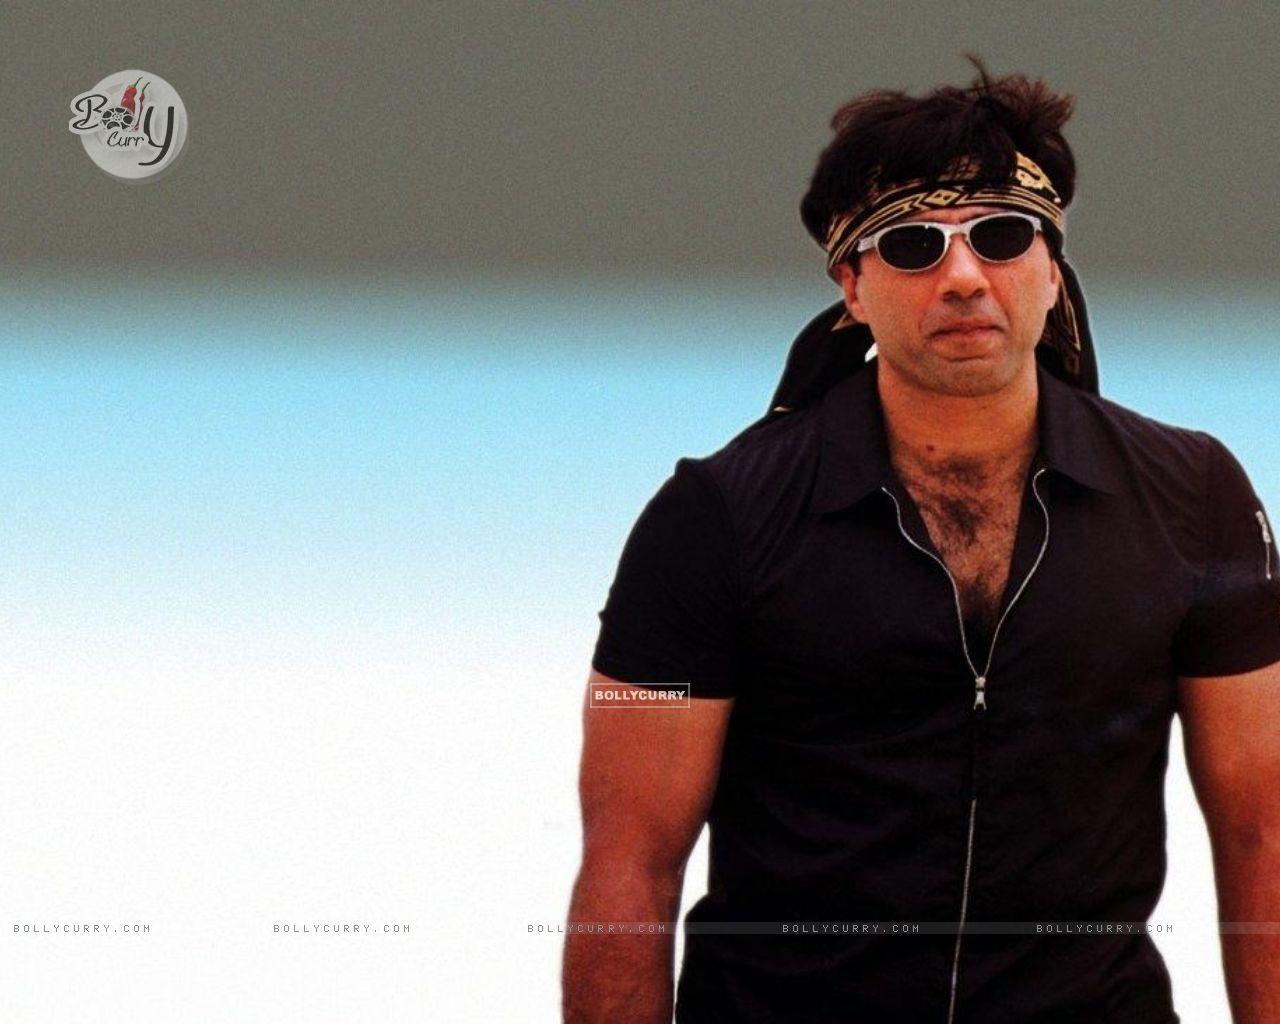 Sunny Deol Wallpapers - Wallpaper Cave